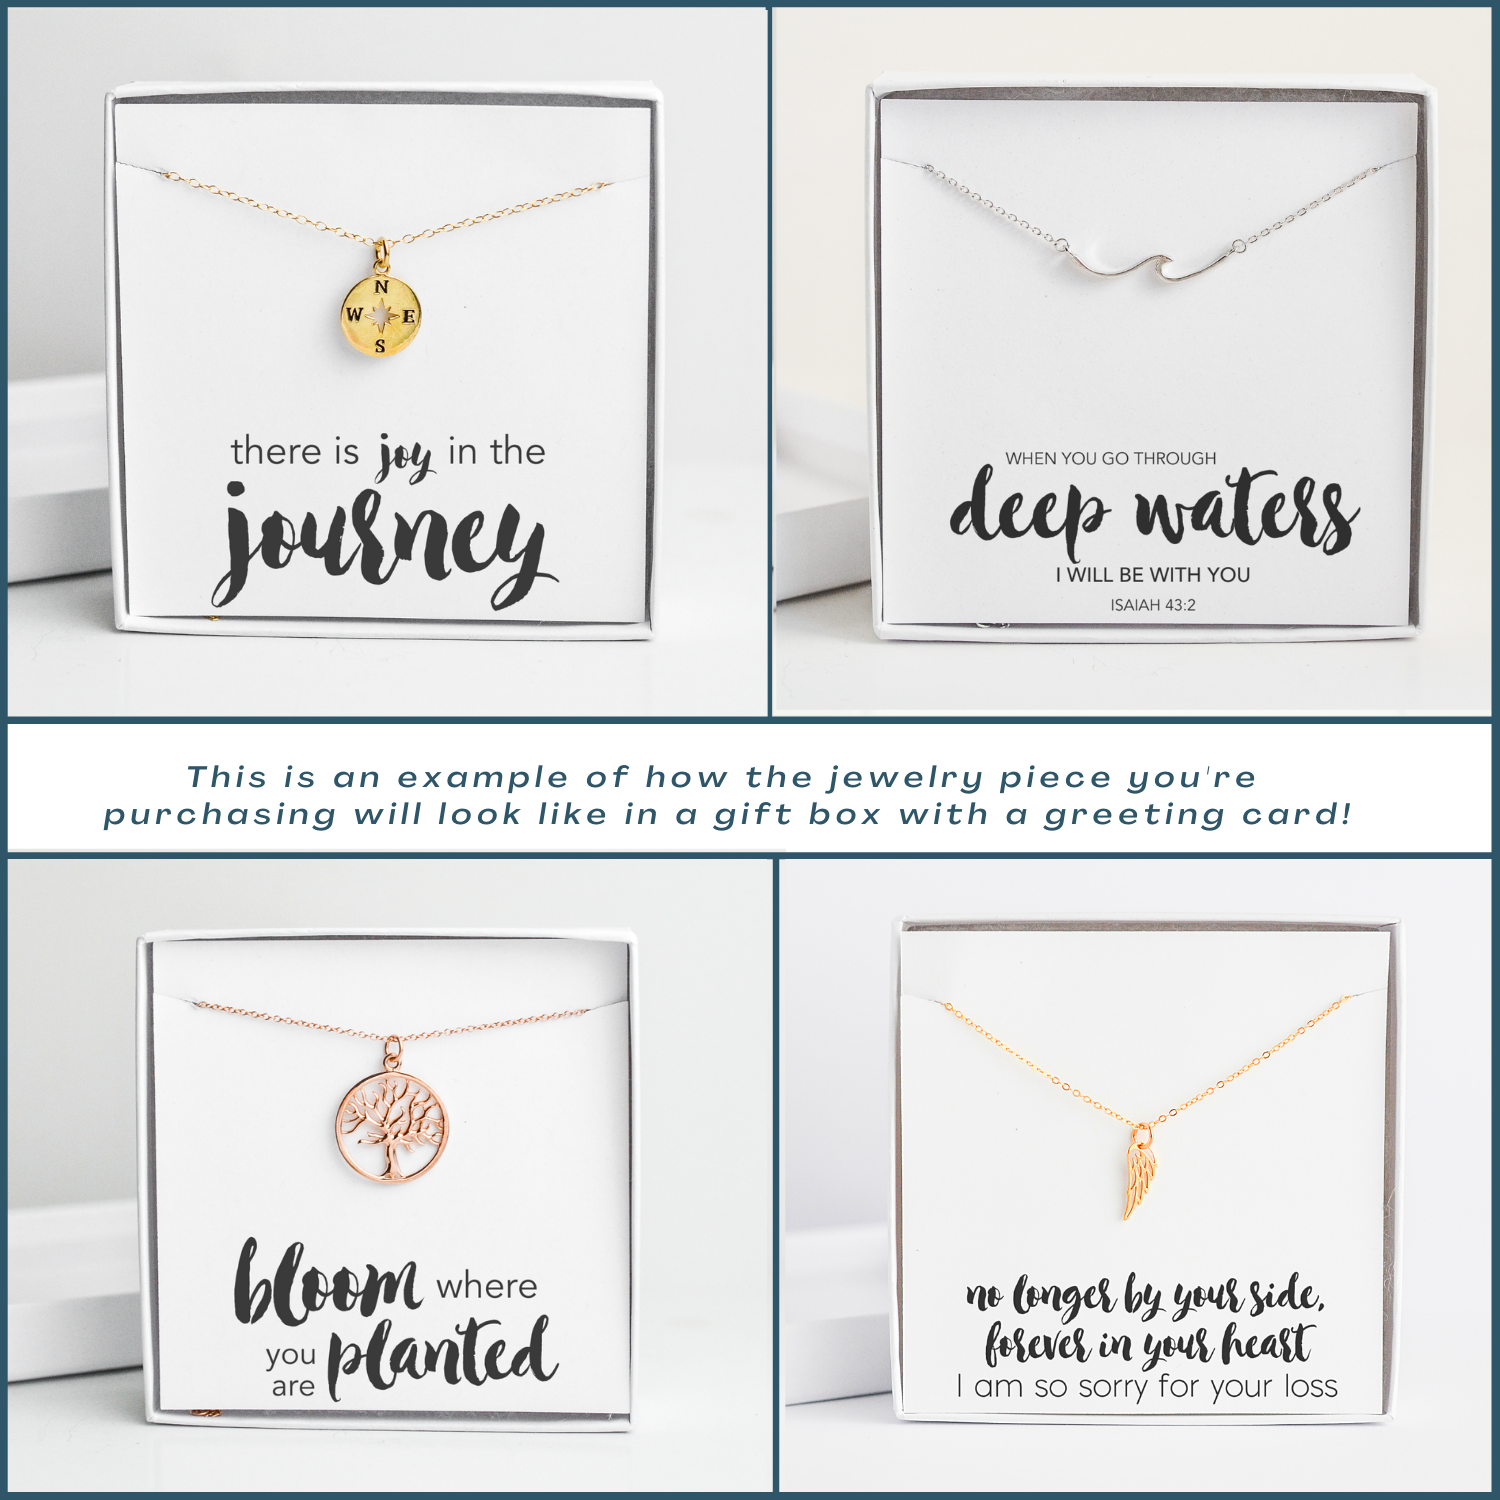 Inspirational Necklace Card has special message and charm